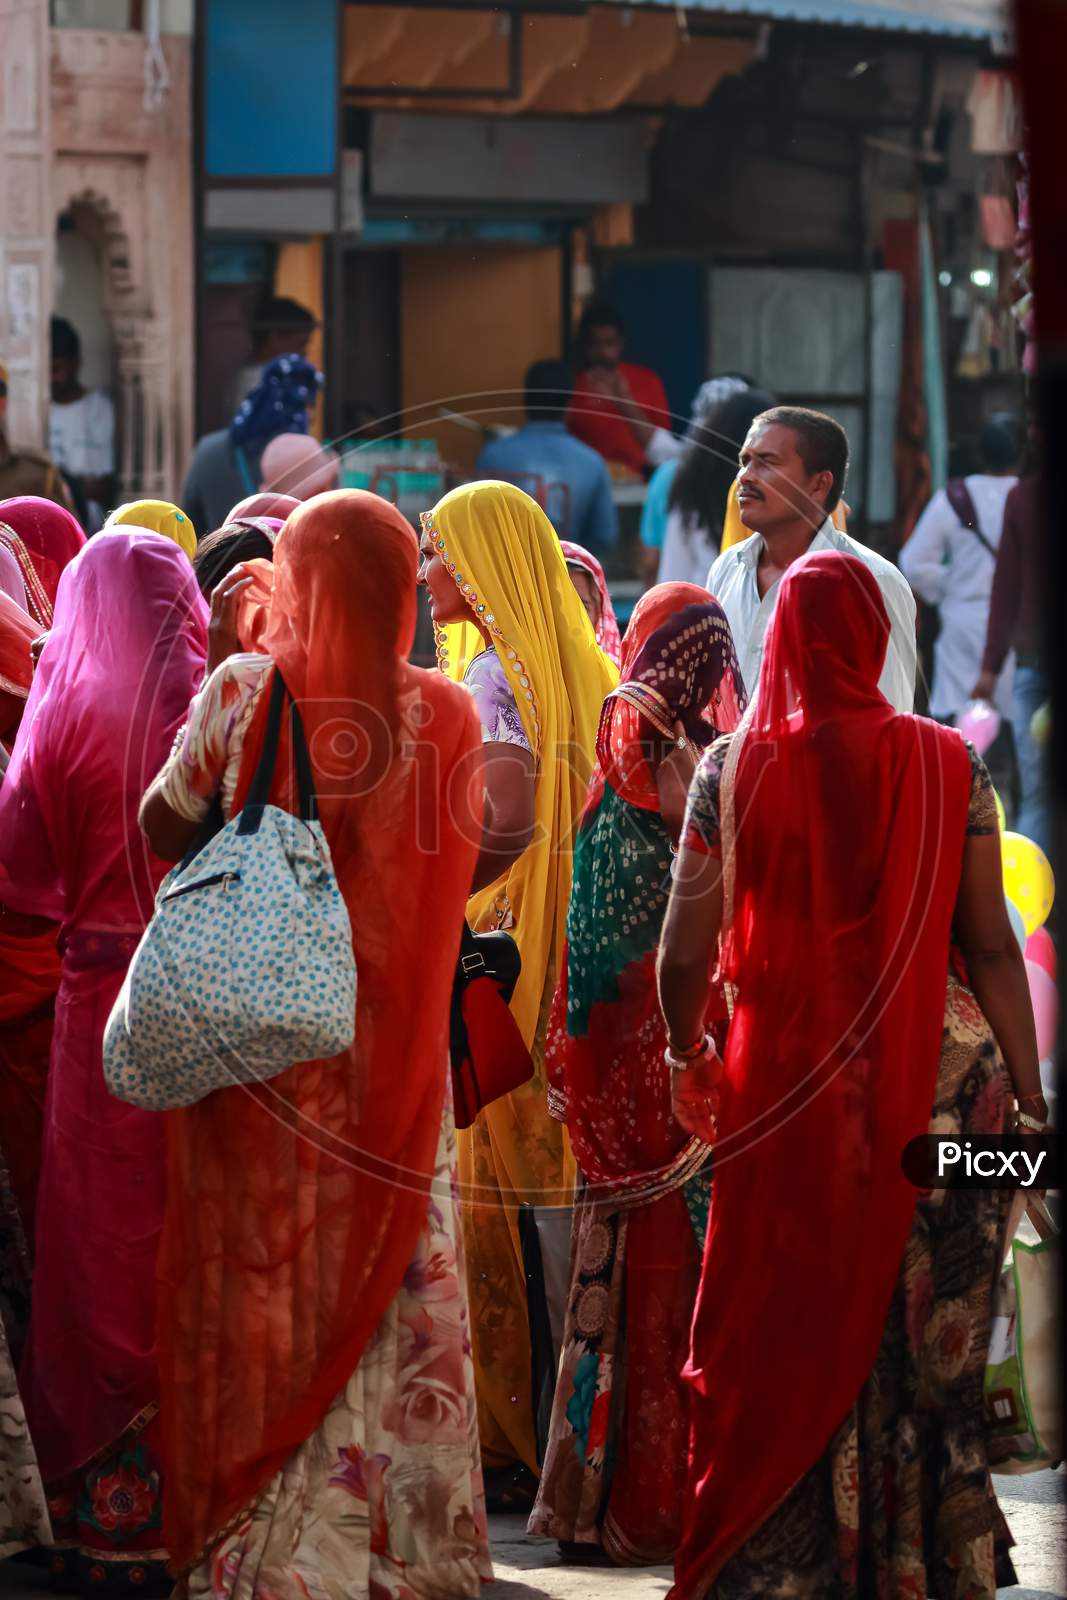 A group of Indian women wearing traditional clothes with vibrant colors at Pushkar, Rajasthan, India